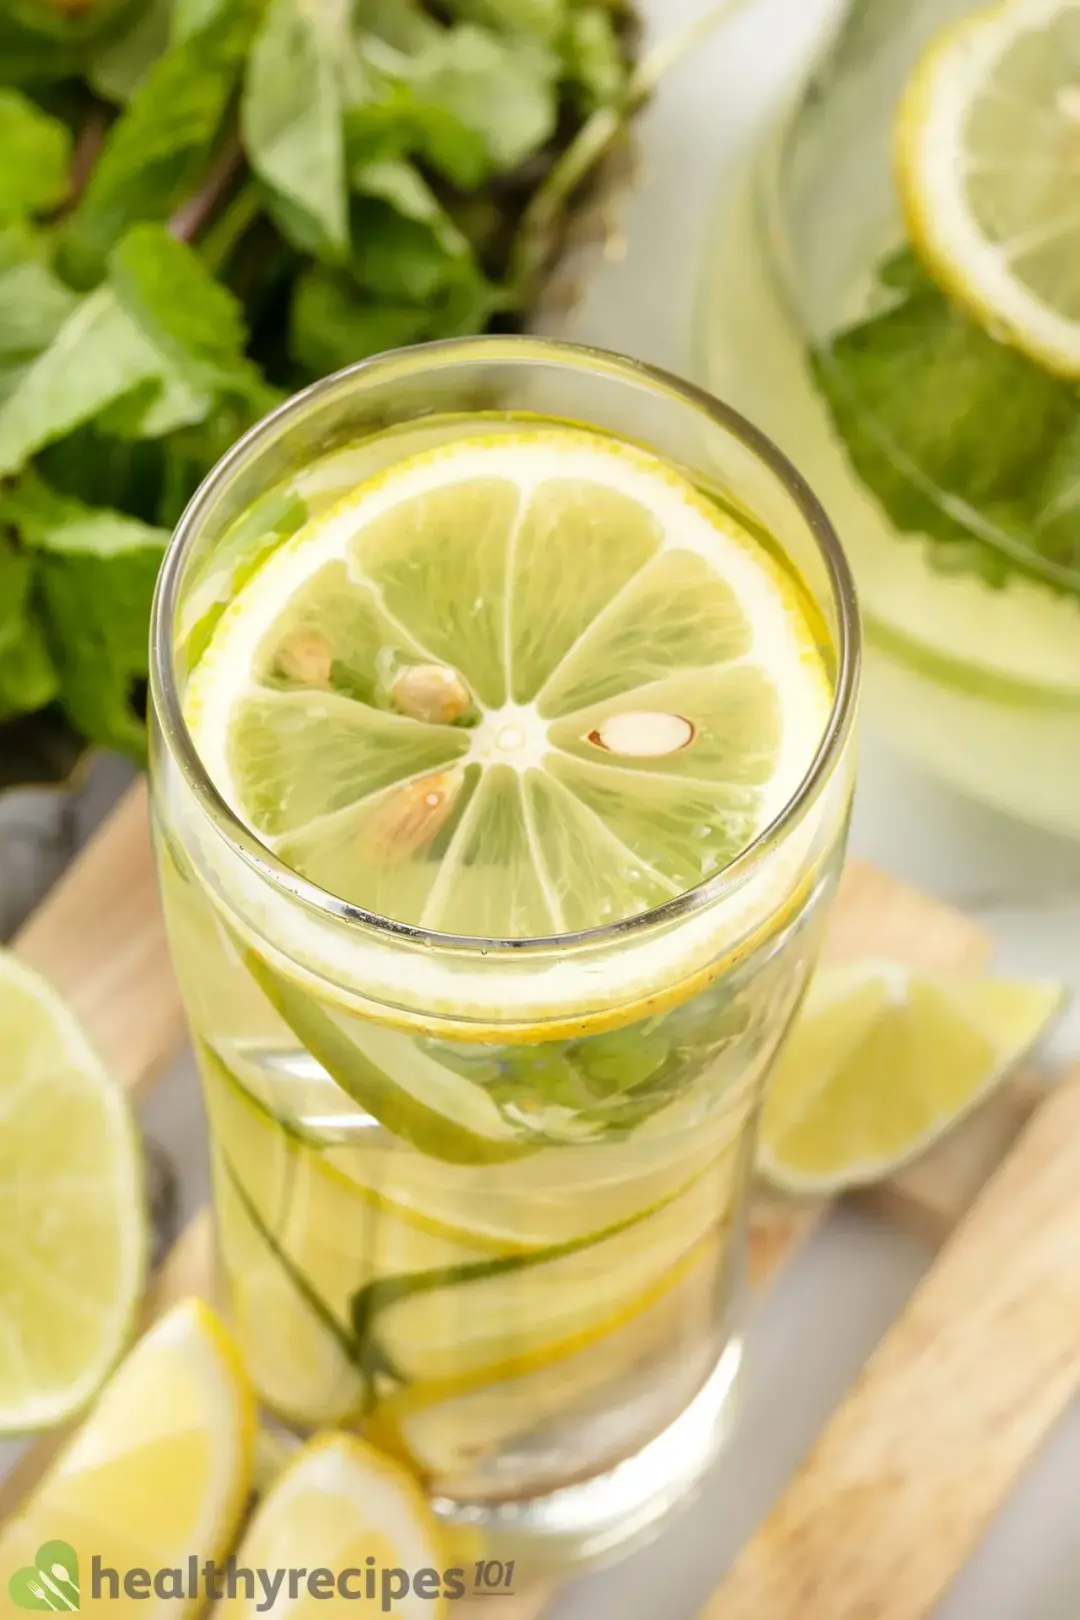 A glass filled with water and lemon wheels, next to lots of mint leaves